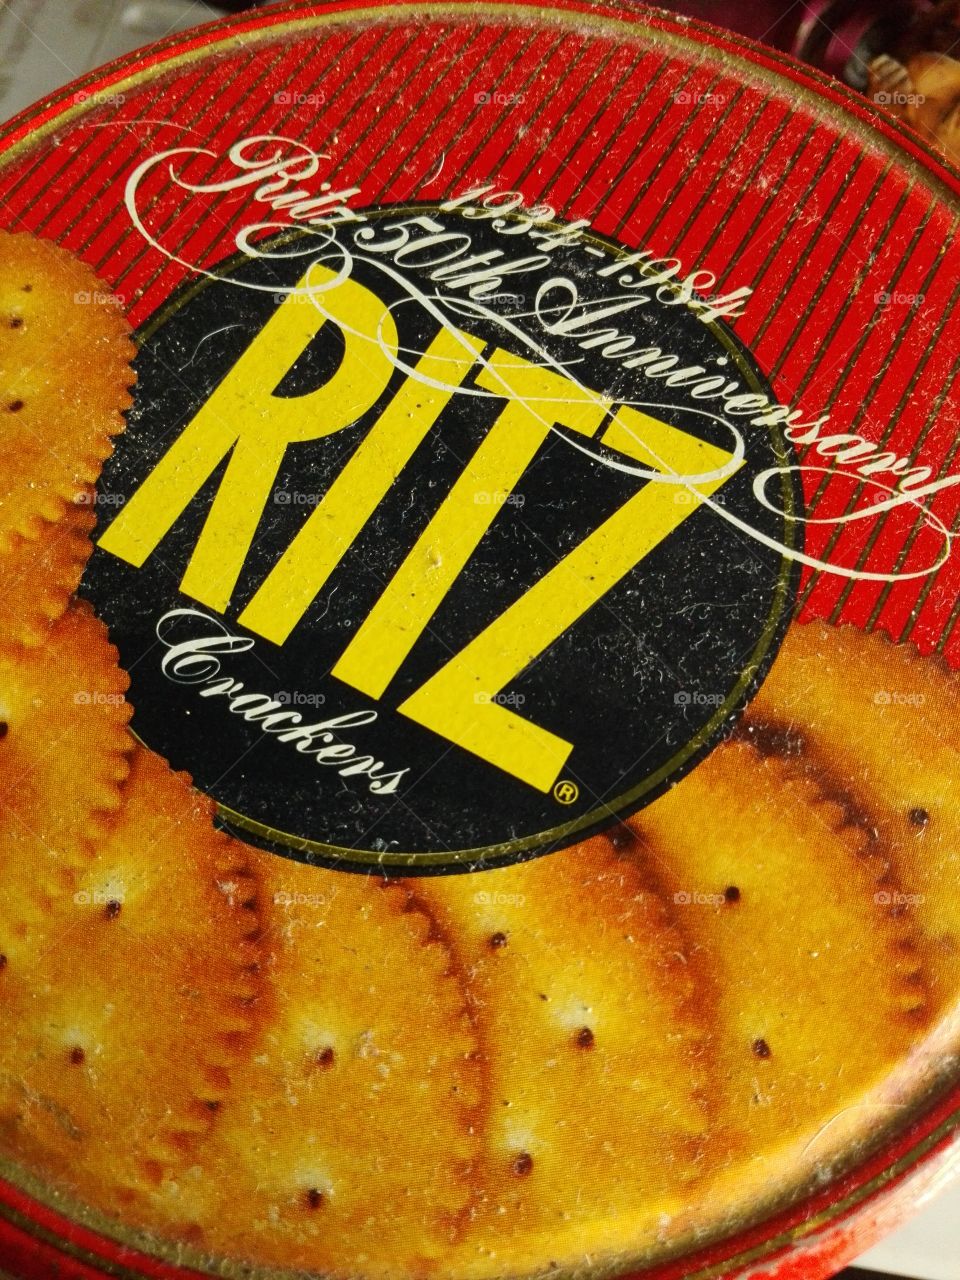 An old Ritz Crackers container. It's their 50th anniversary edition.